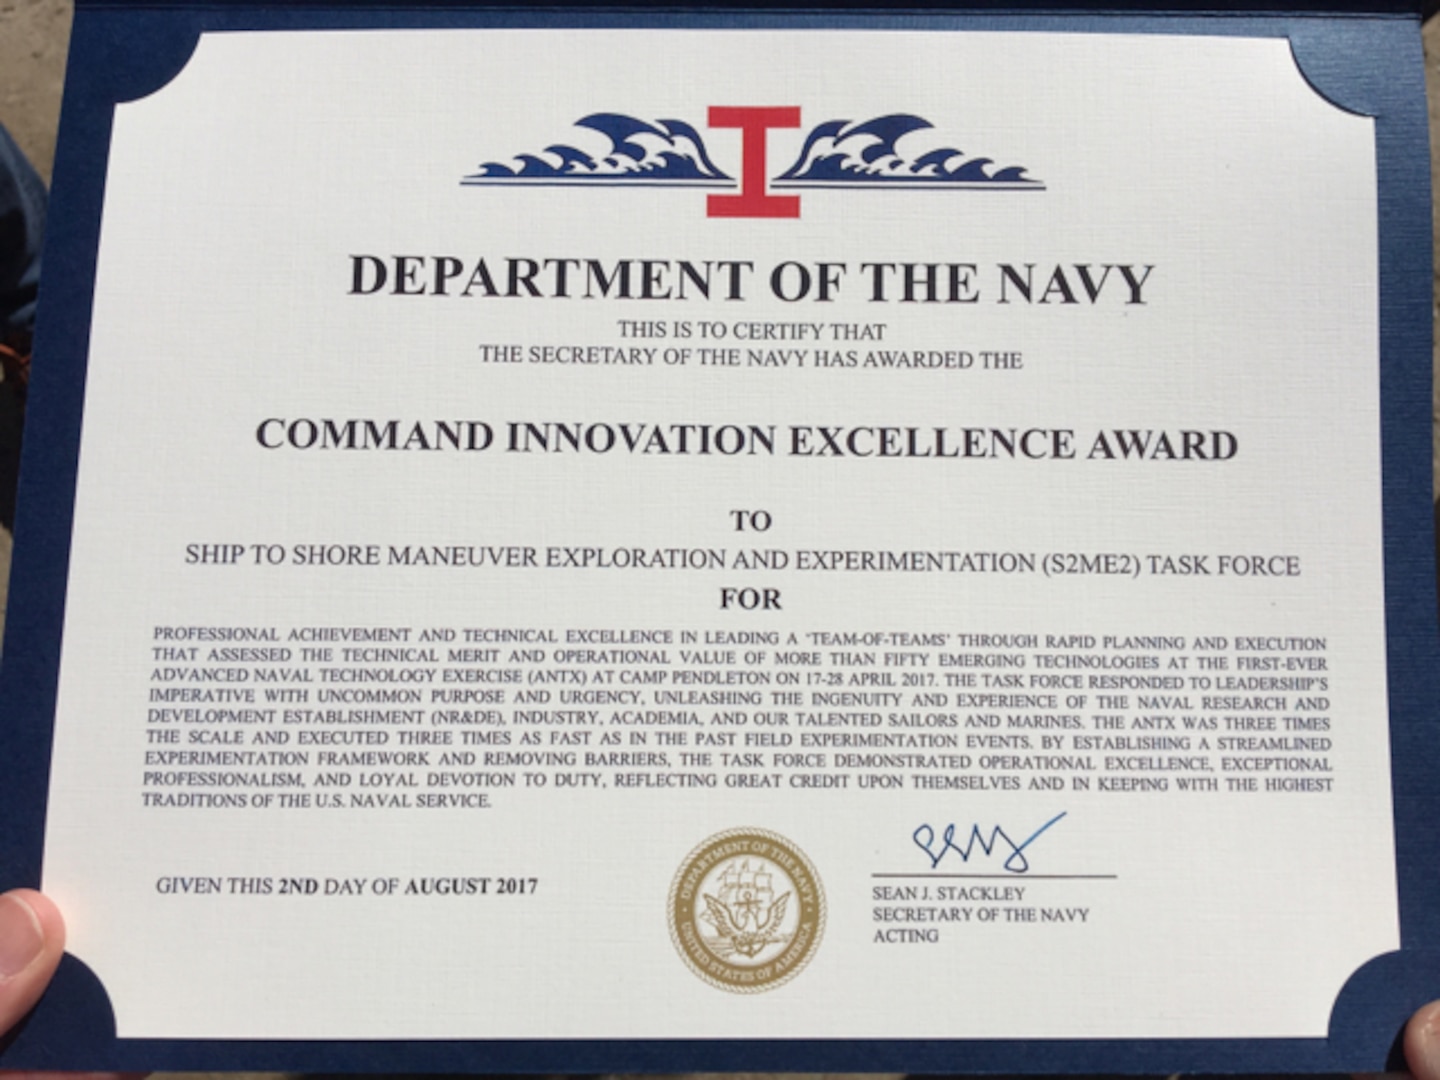 CRANE, Ind. – Jeff Miller, an electronics technician at Naval Surface Warfare Center, Crane Division (NSWC Crane), received a Secretary of the Navy (SECNAV) Innovation Excellence award for his contributions to the Ship to Shore Maneuver Exploration and Experimentation (S2ME2) Advanced Naval Technology Exercise (ANTX).